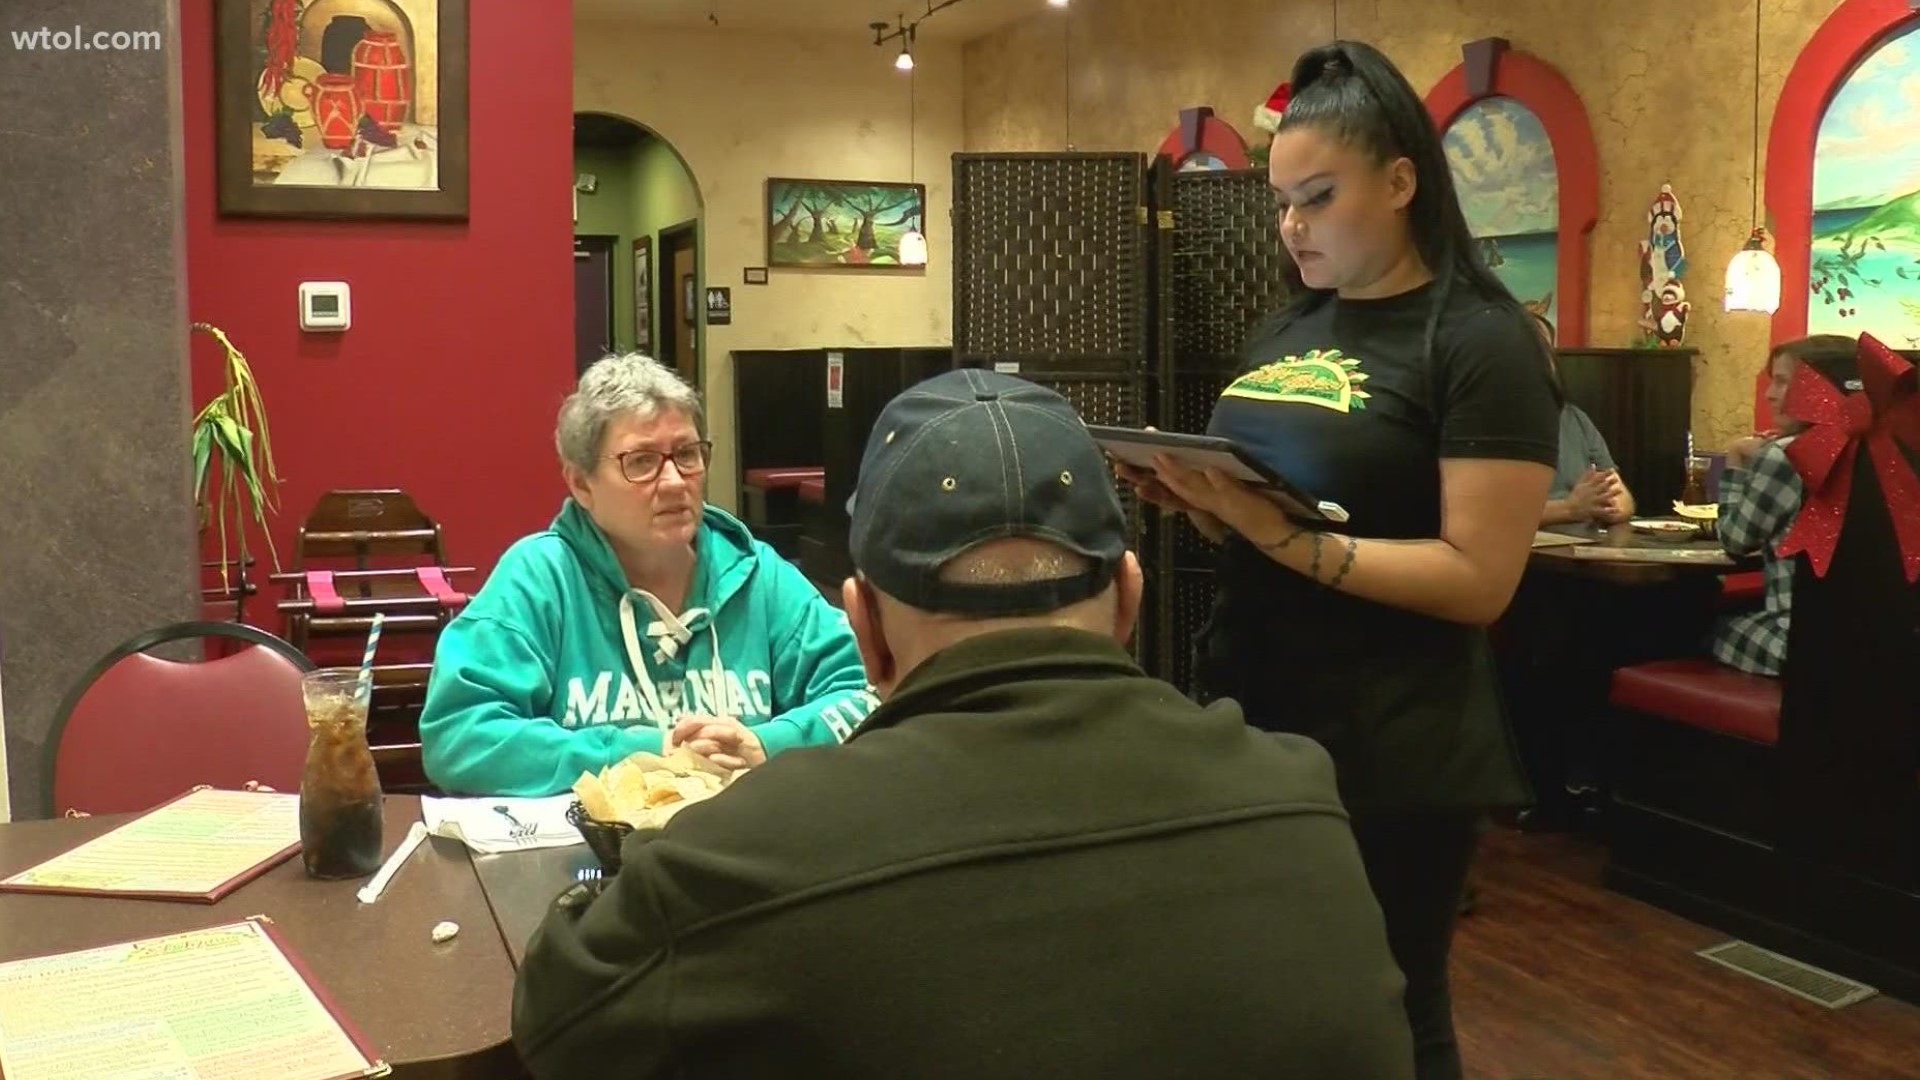 El Tipico has been serving up beef tips and other Mexican dishes with steak for 53 years, but the owner says she can't find organic steak.